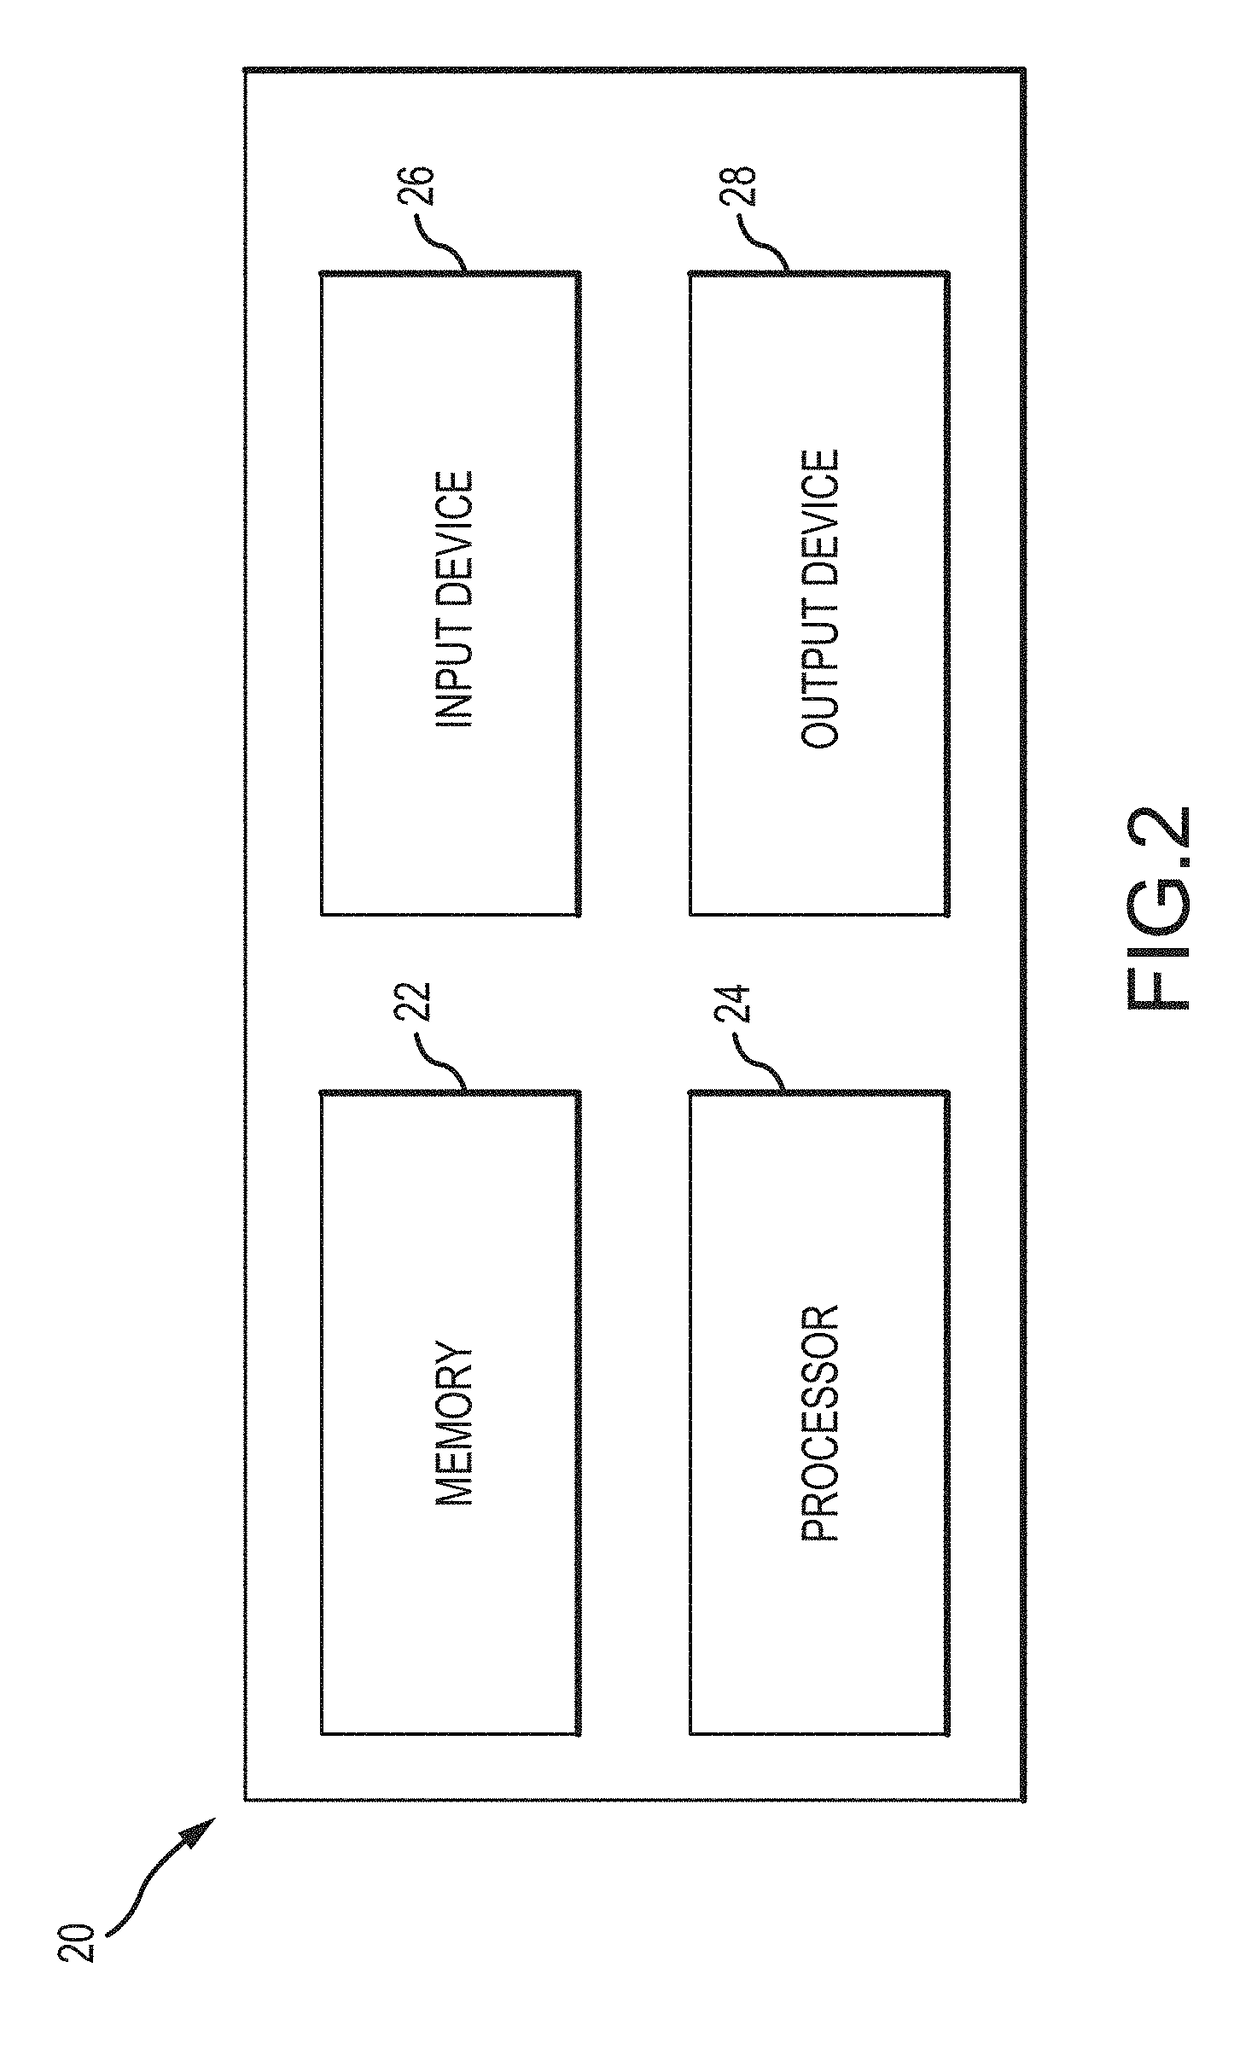 System and method of character recognition using fully convolutional neural networks with attention